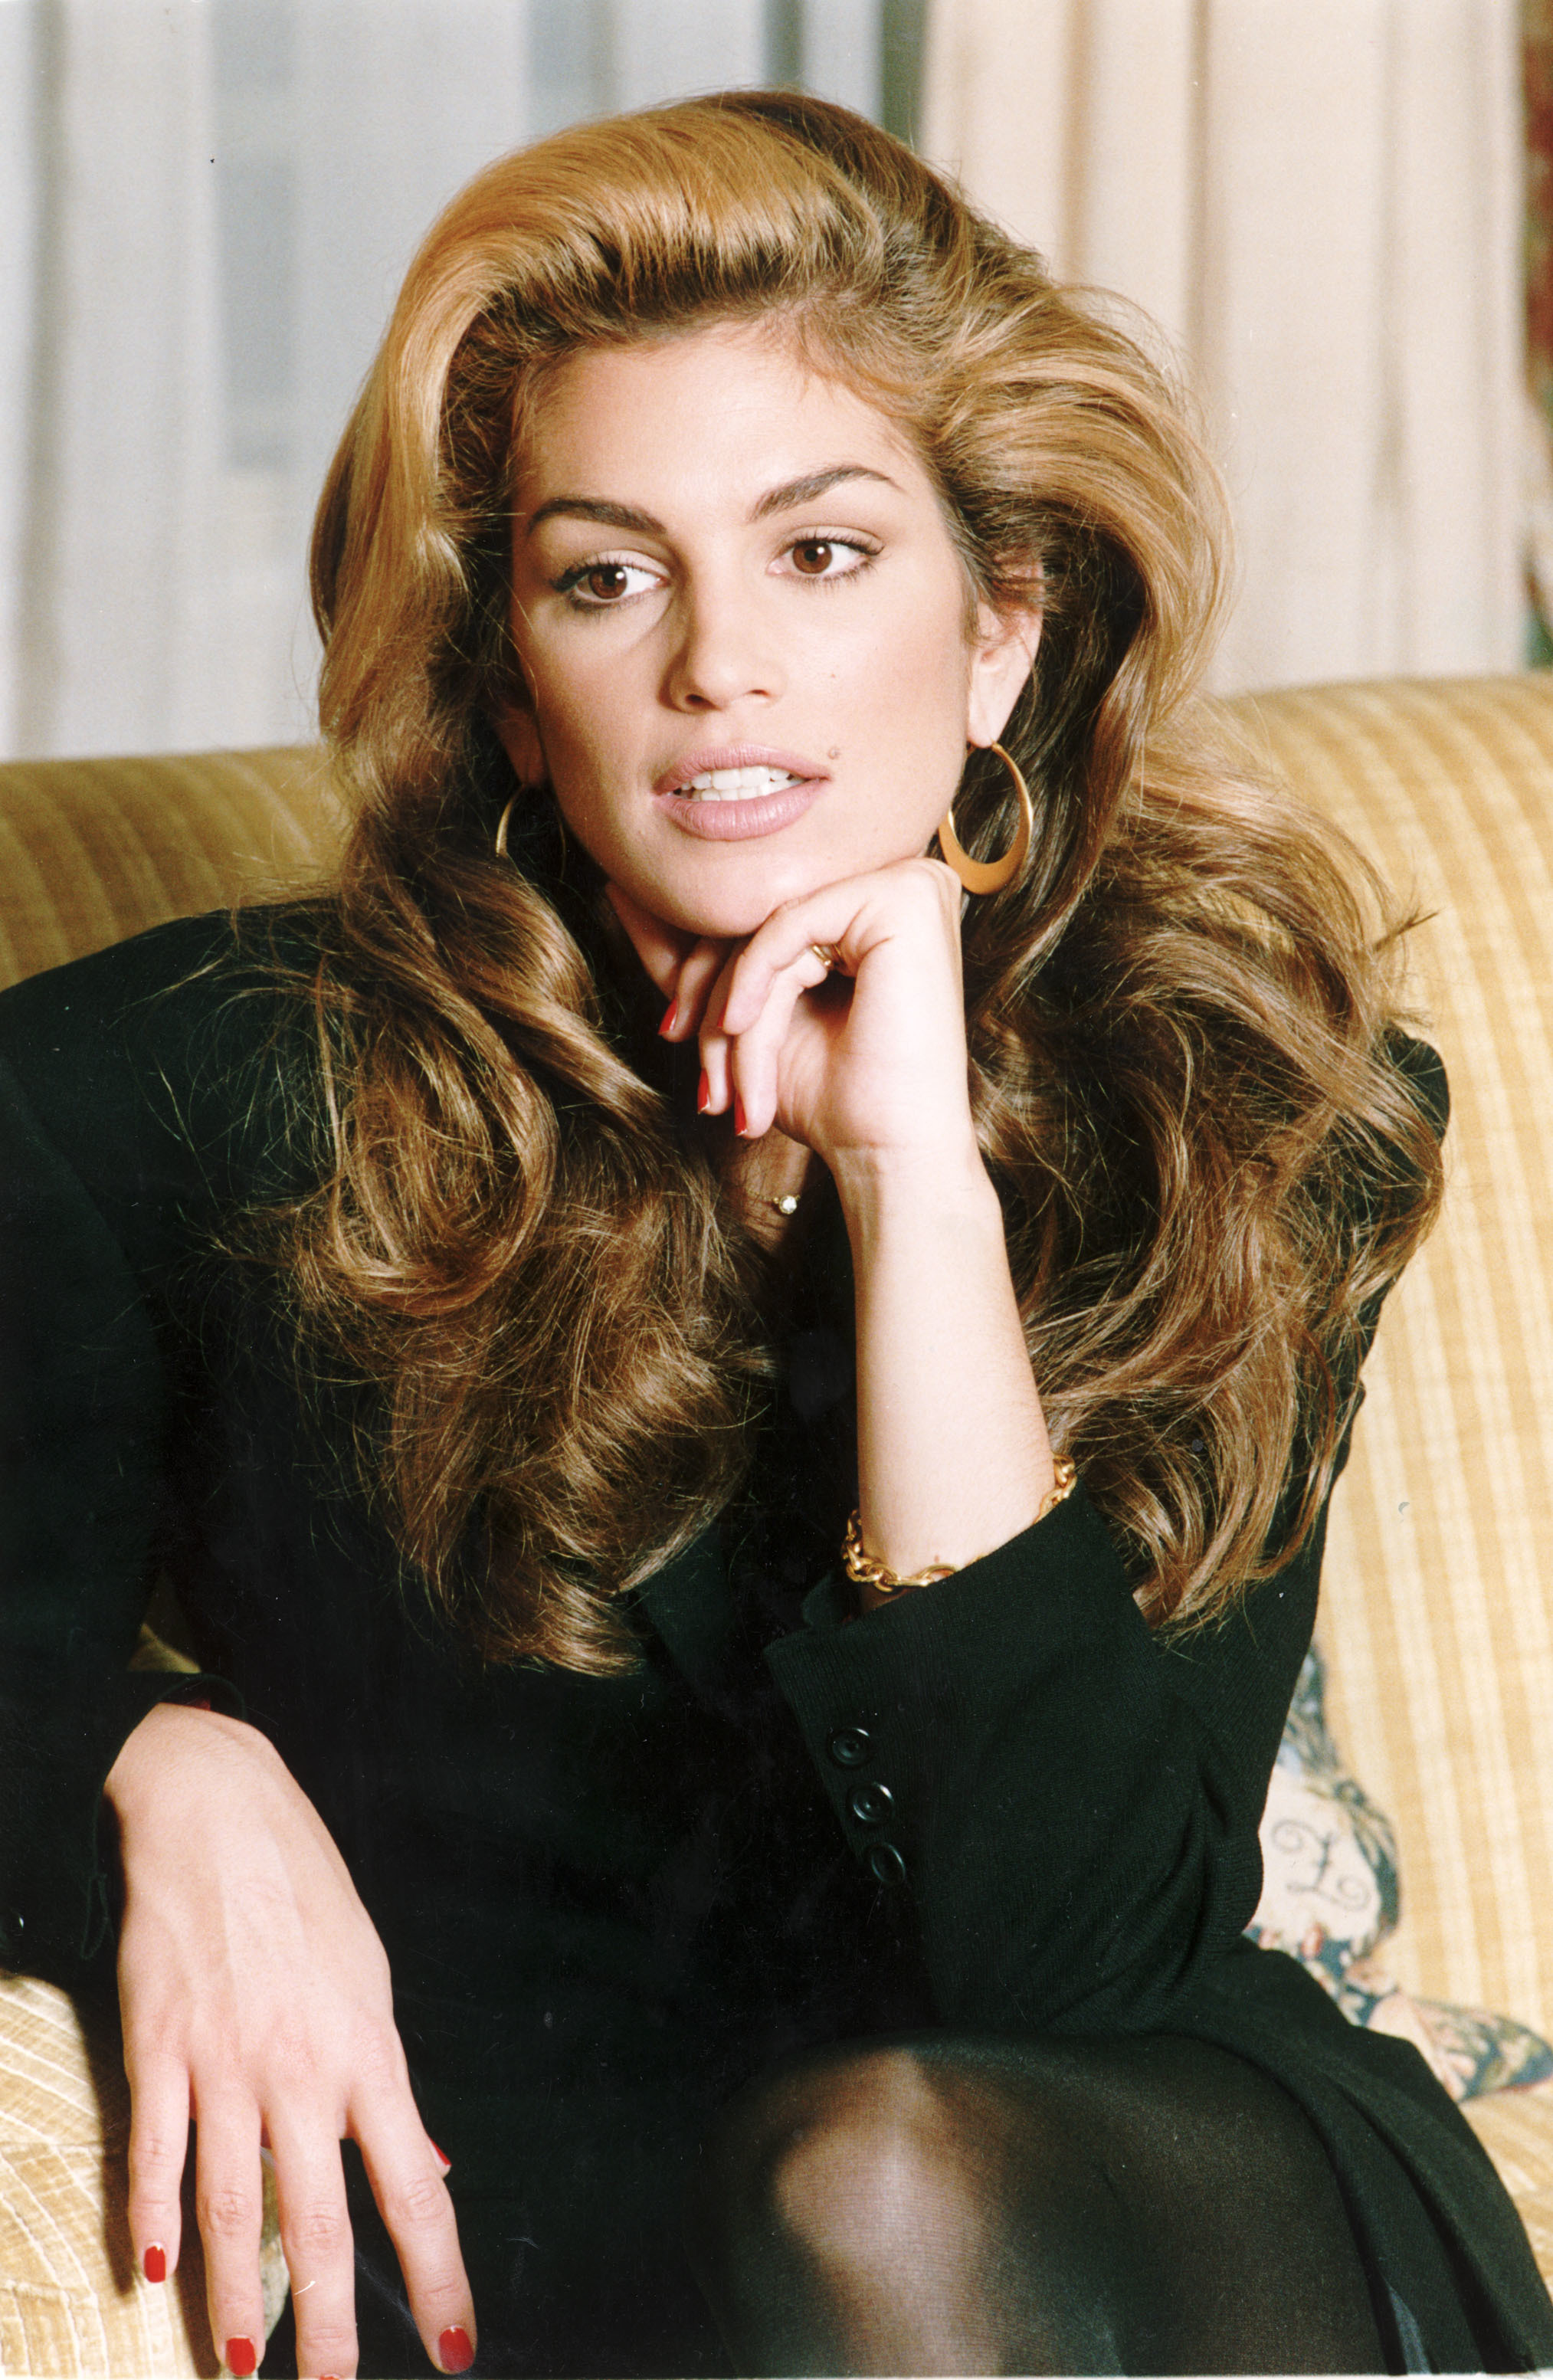 Cindy Crawford young model - Supermodels of the '80s and '90s - Where ...